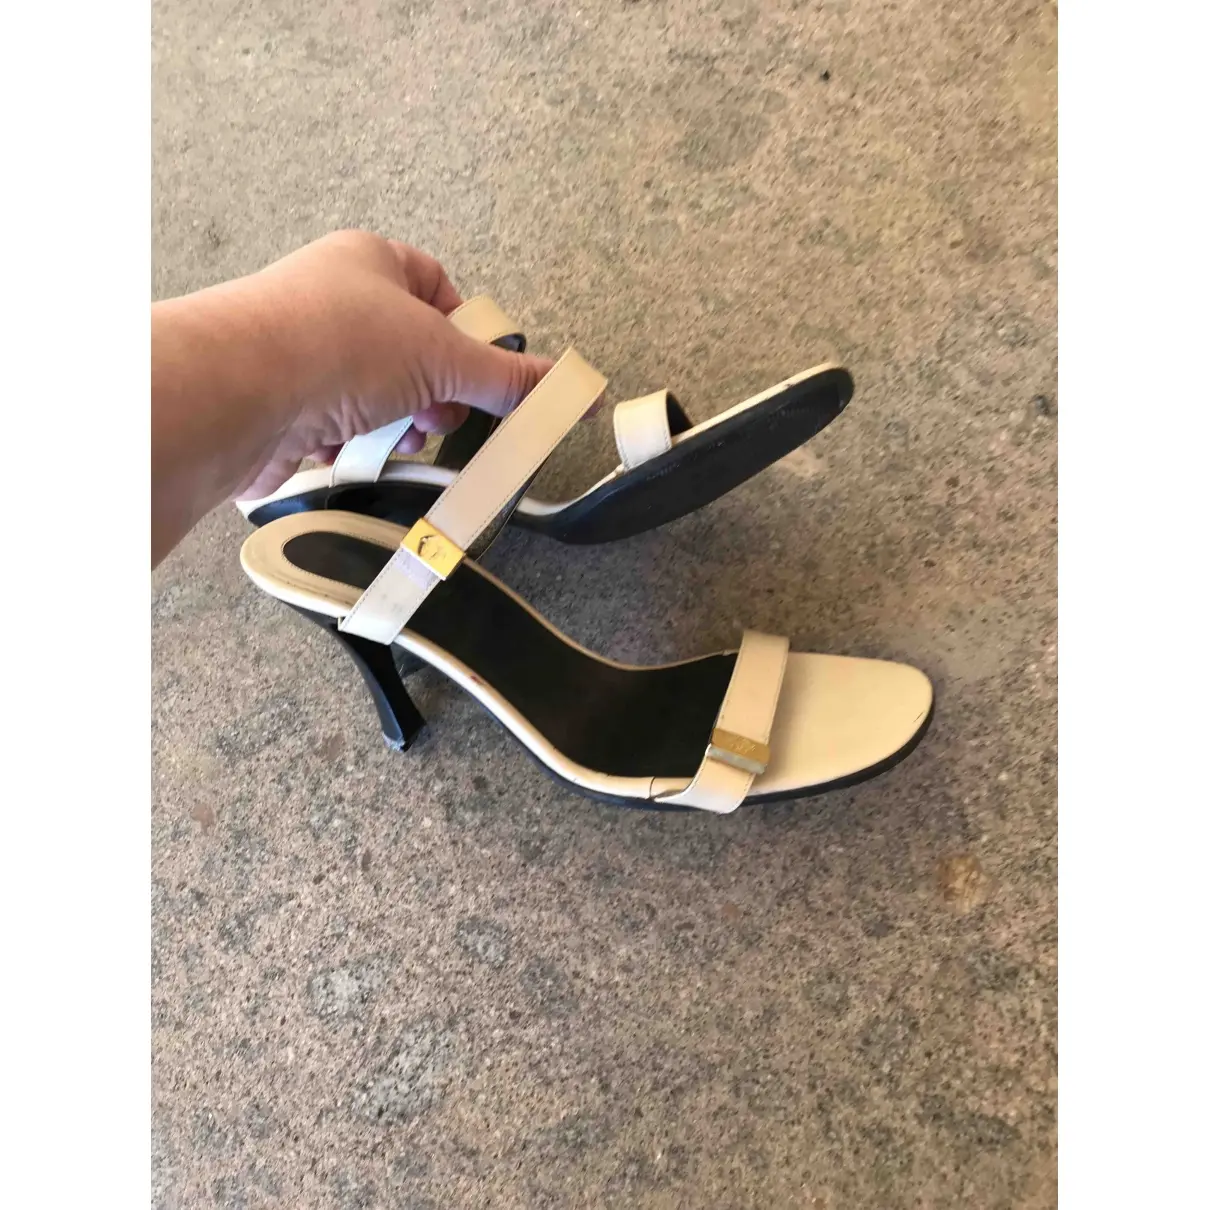 Gianni Versace Leather sandals for sale - Vintage